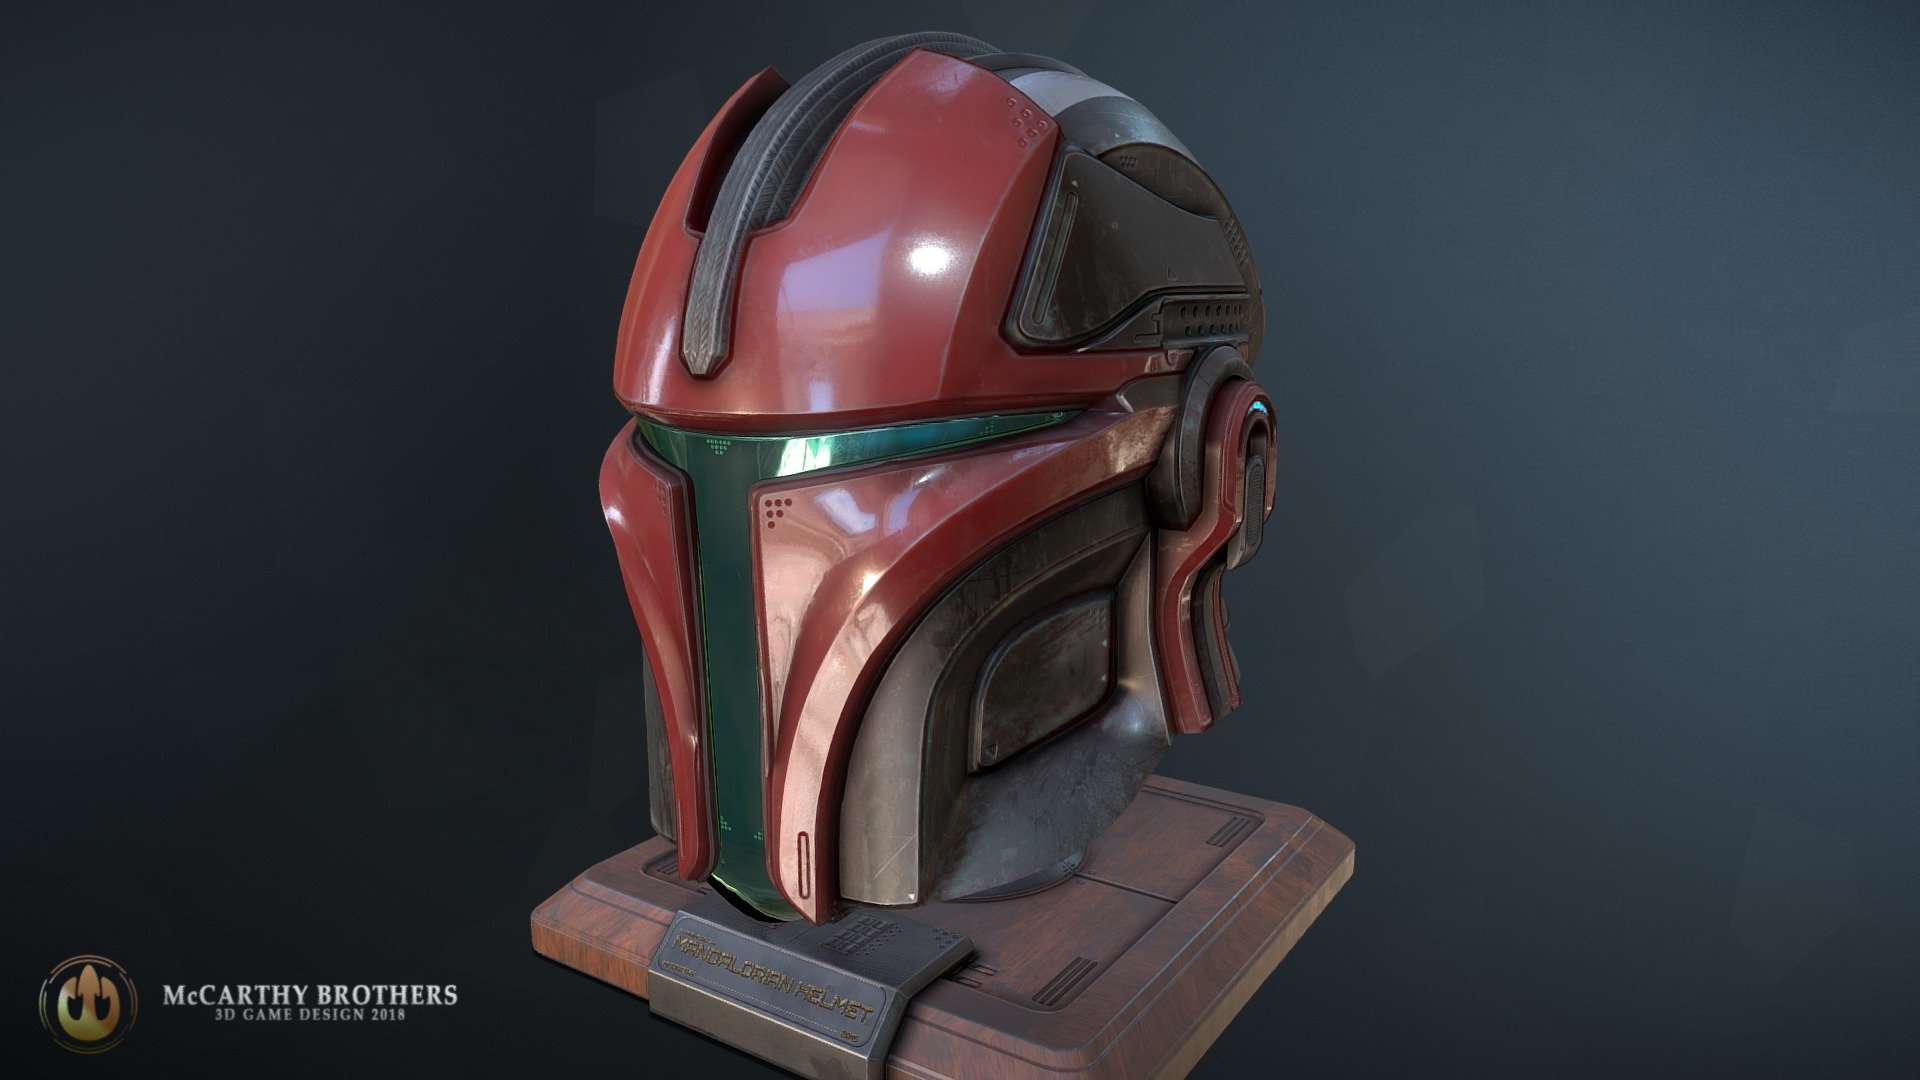 Inspired by &lsquo;The Mandalorian', this is my take on the design - Mando Helmet - Download Free 3D model by McCarthy3D (@joshuawatt811) 3d model